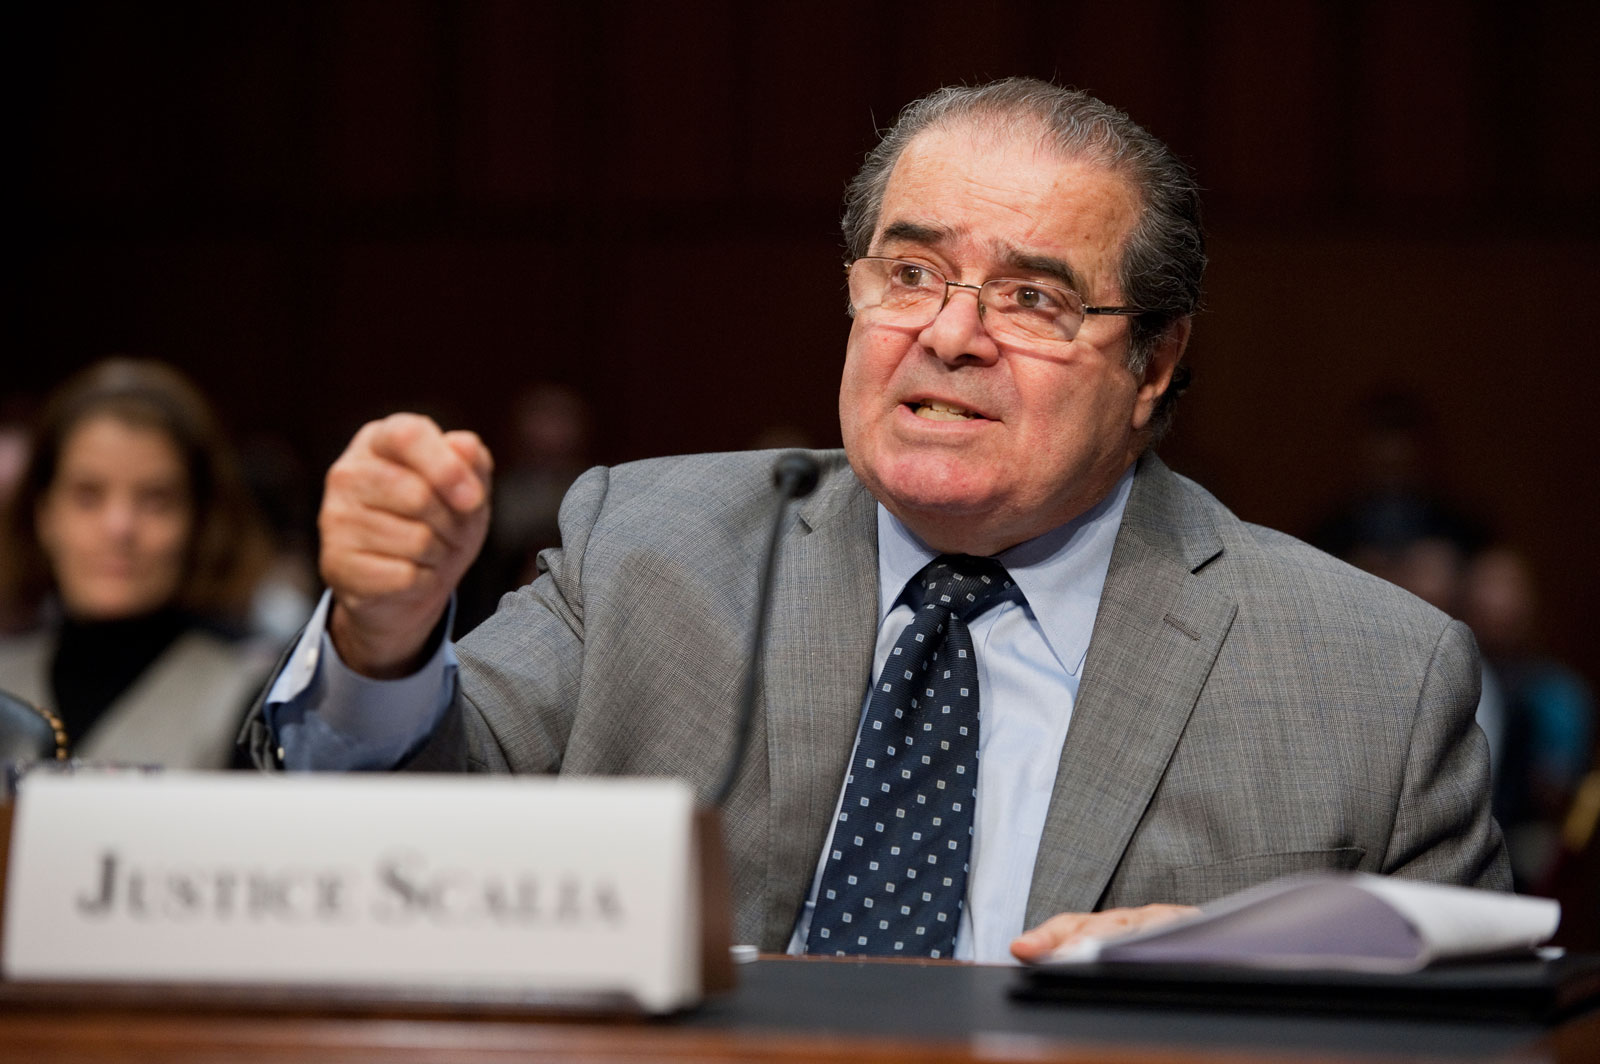 Justice Antonin Scalia testifying before the Senate Judiciary Committee about the role of judges under the Constitution, Washington, D.C., October 5, 2011